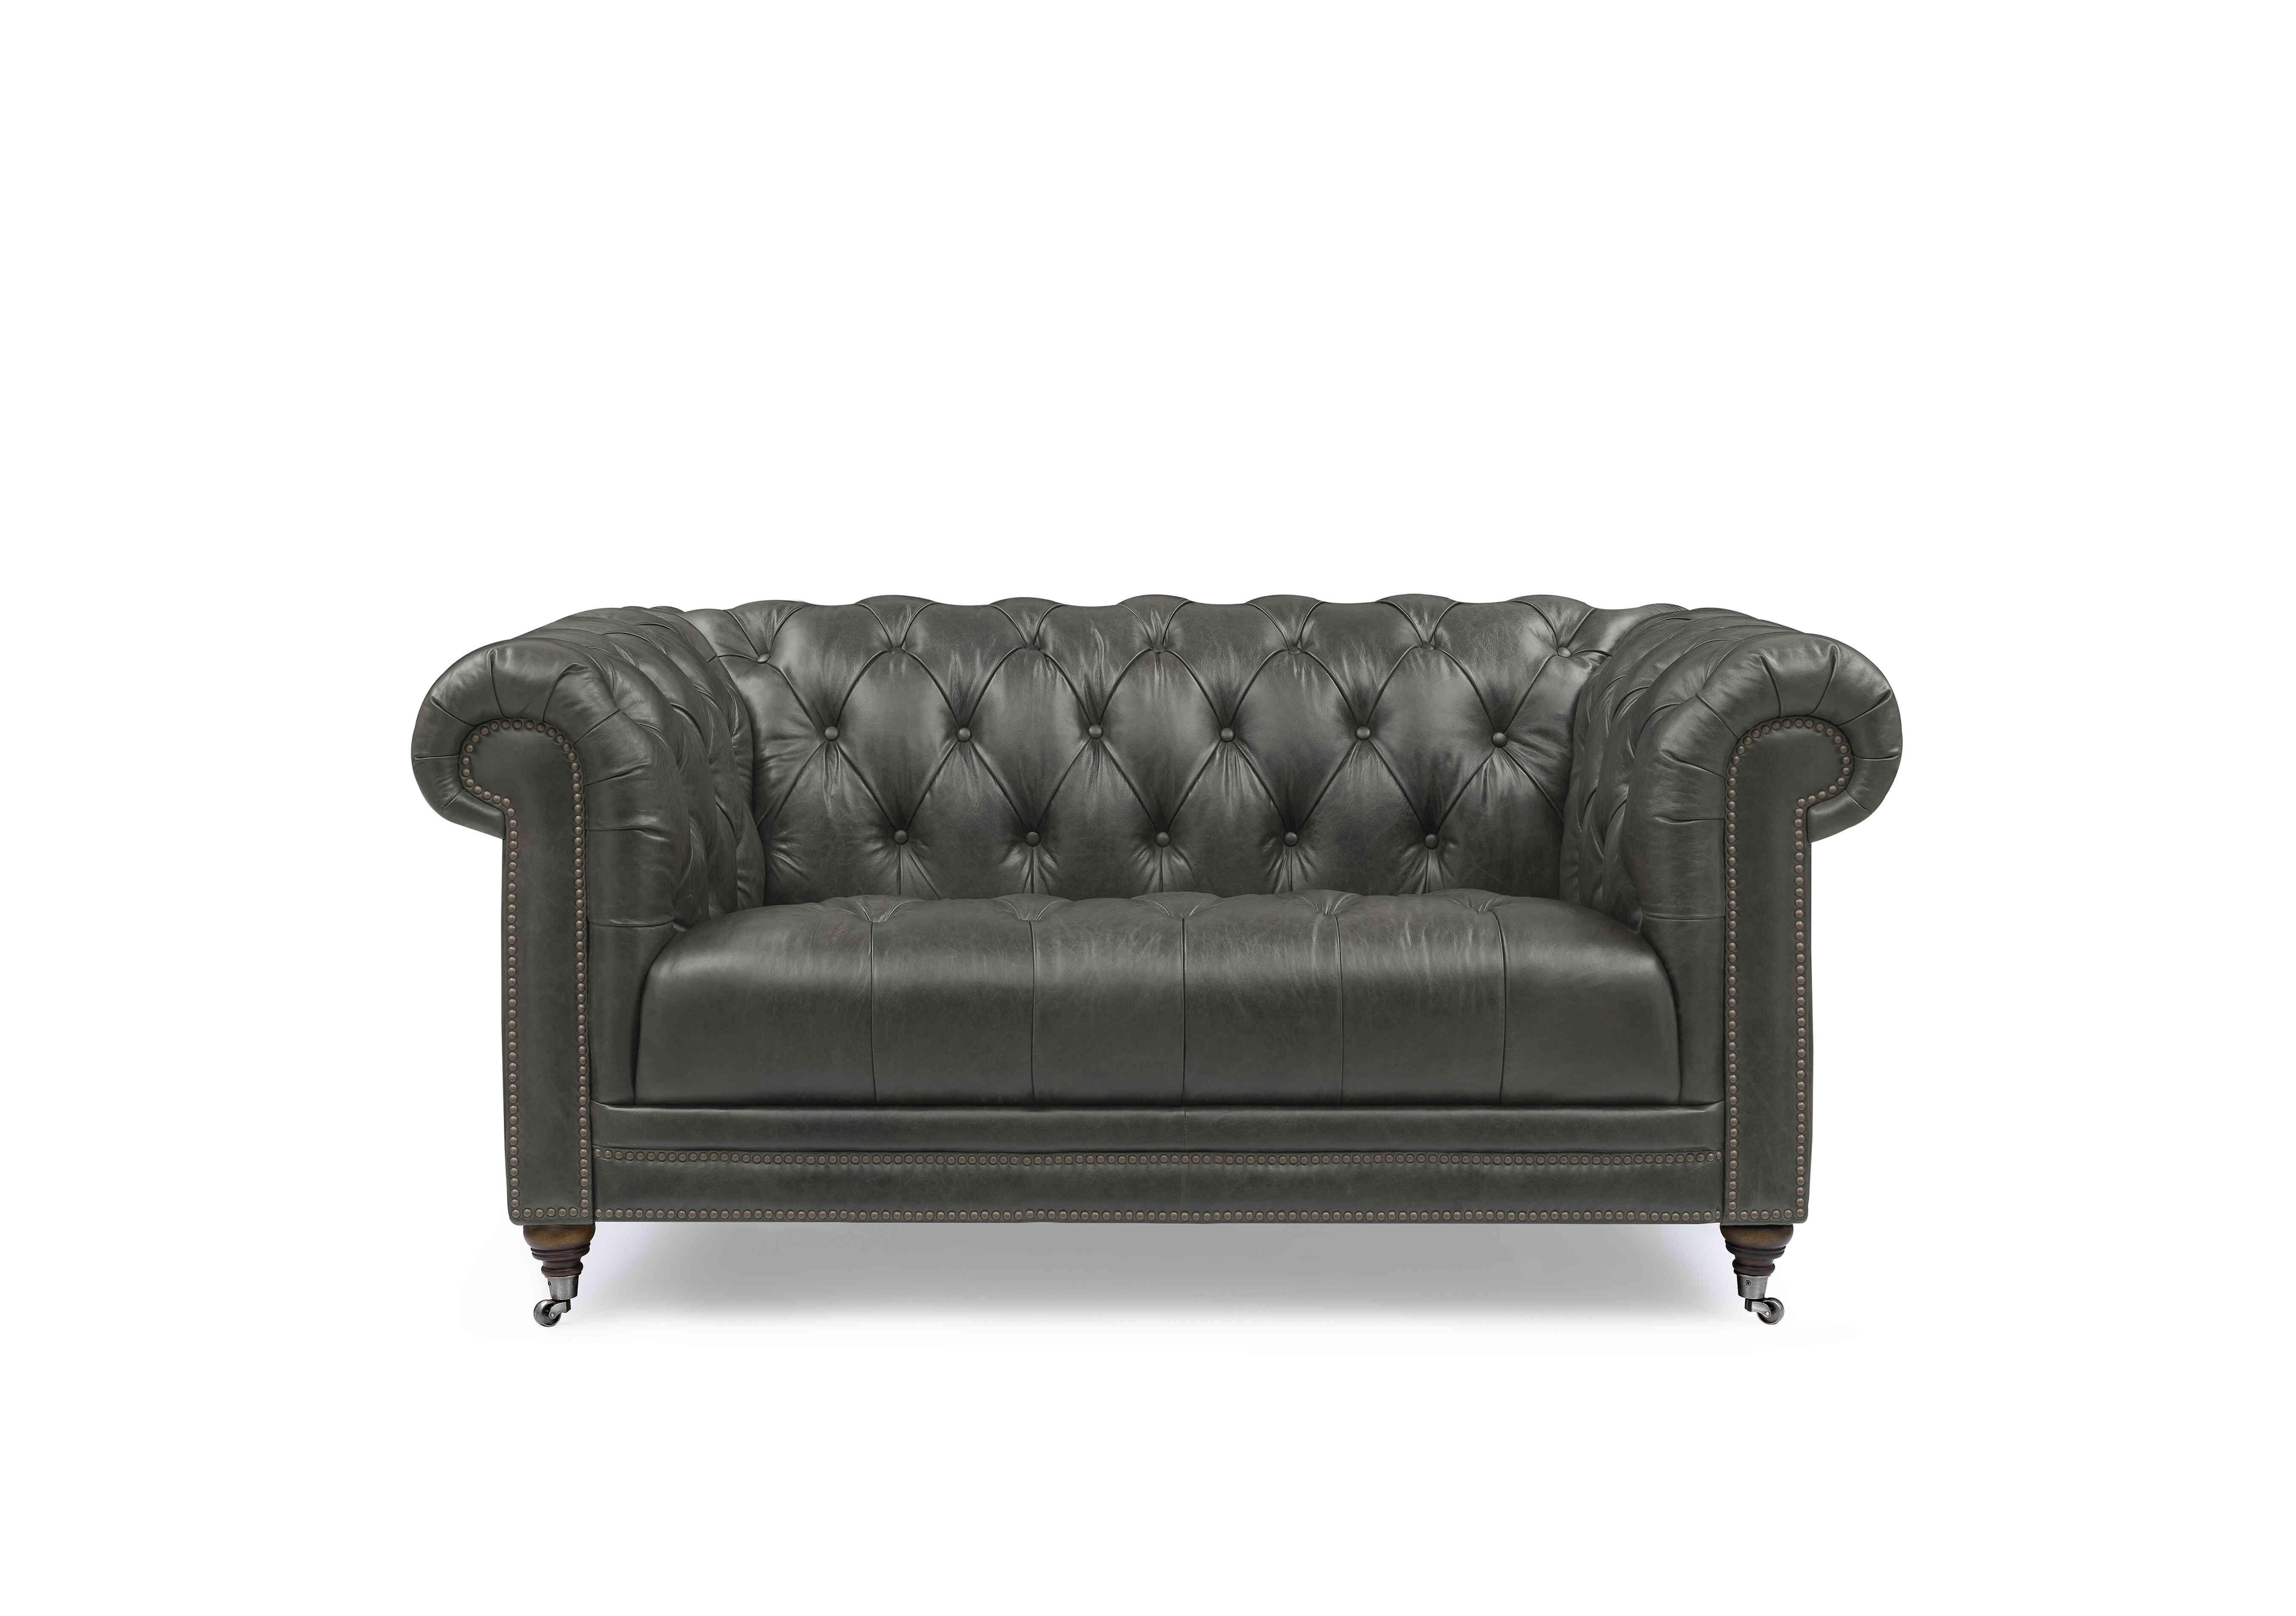 Walter 2 Seater Leather Chesterfield Sofa in X3y2-1966ls Granite on Furniture Village